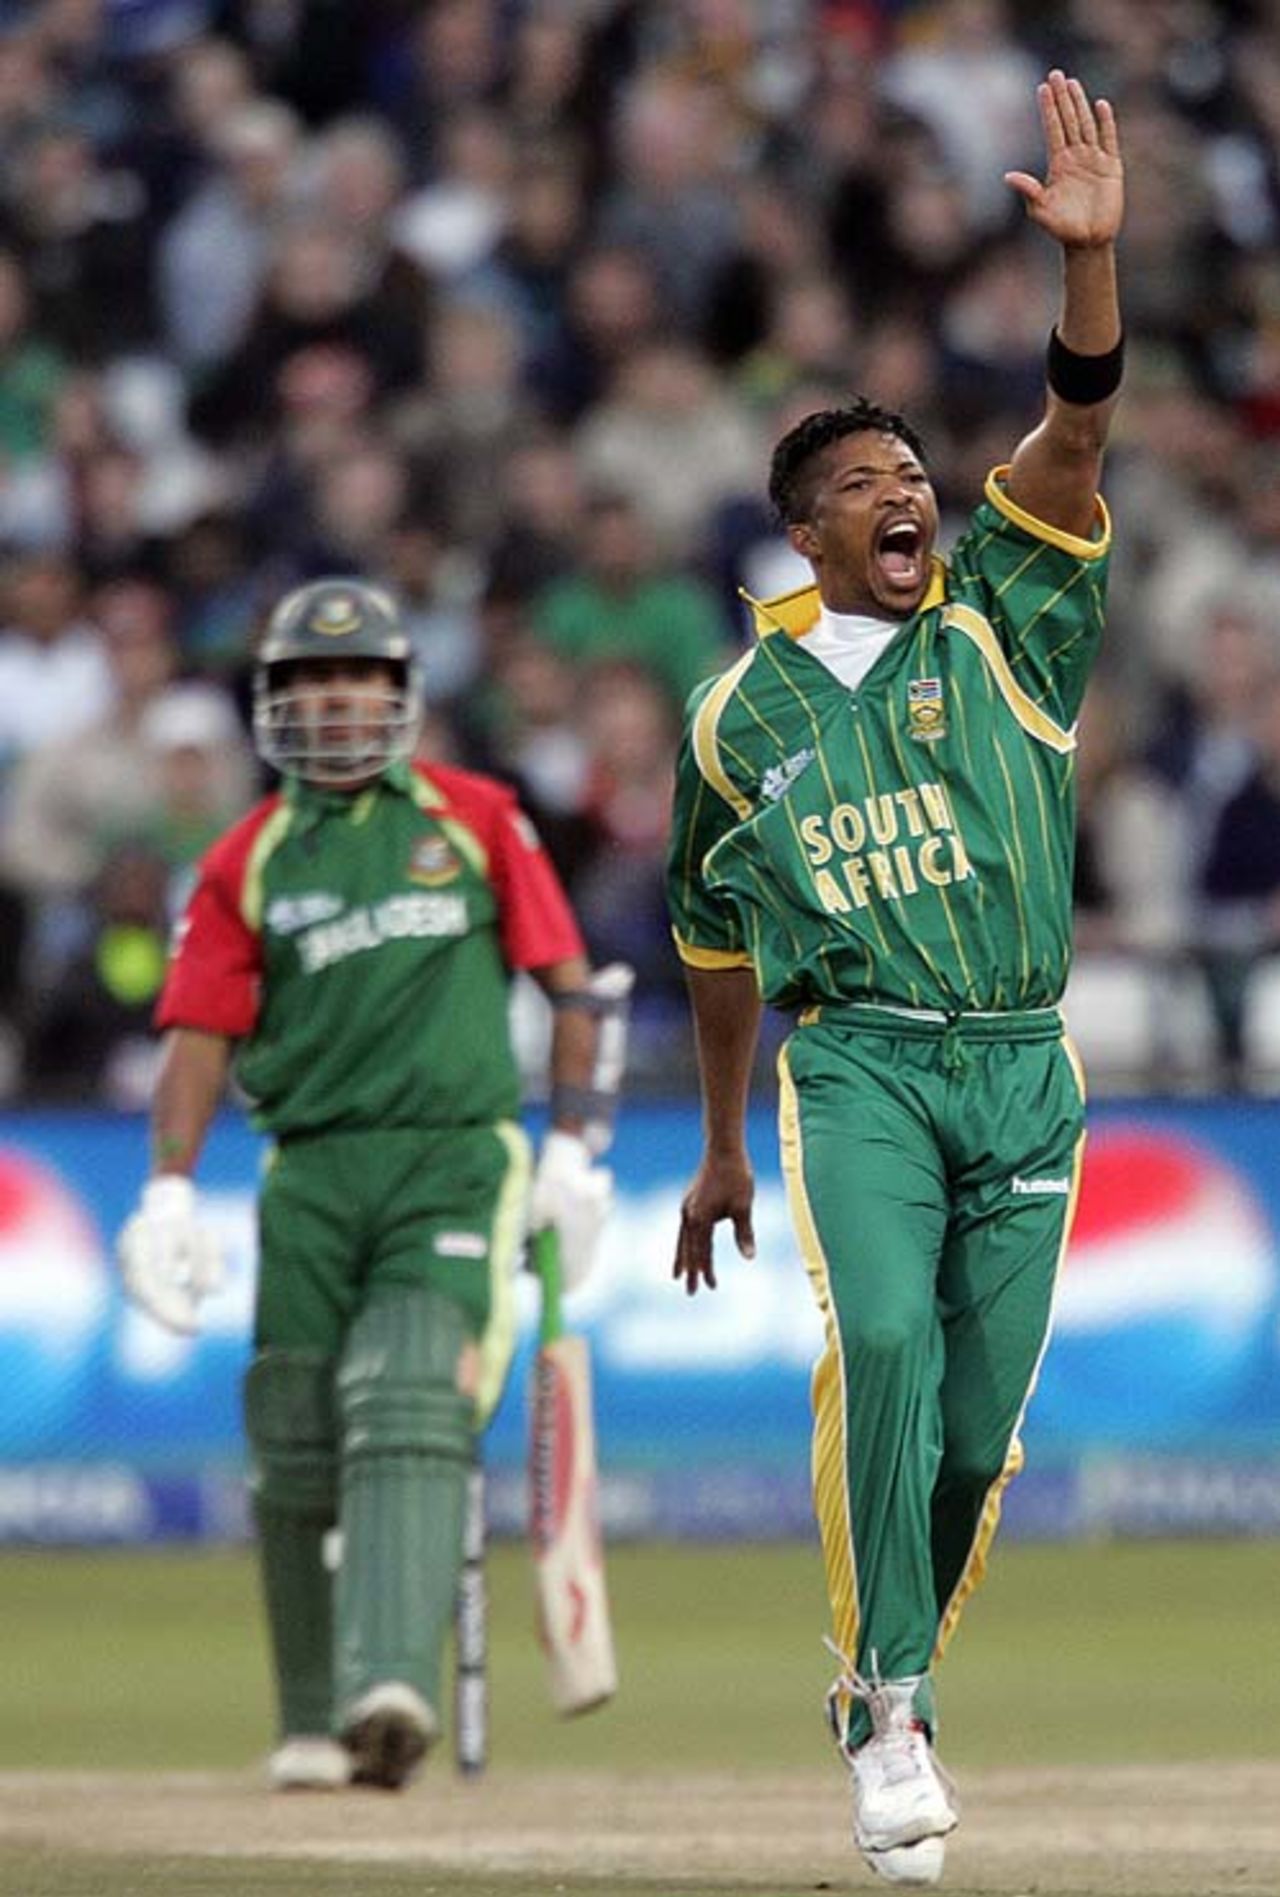 Makhaya Ntini makes a successful appeal against Nazimuddin, South Africa v Bangladesh, Group A, ICC World Twenty20, Cape Town, September 15, 2007 